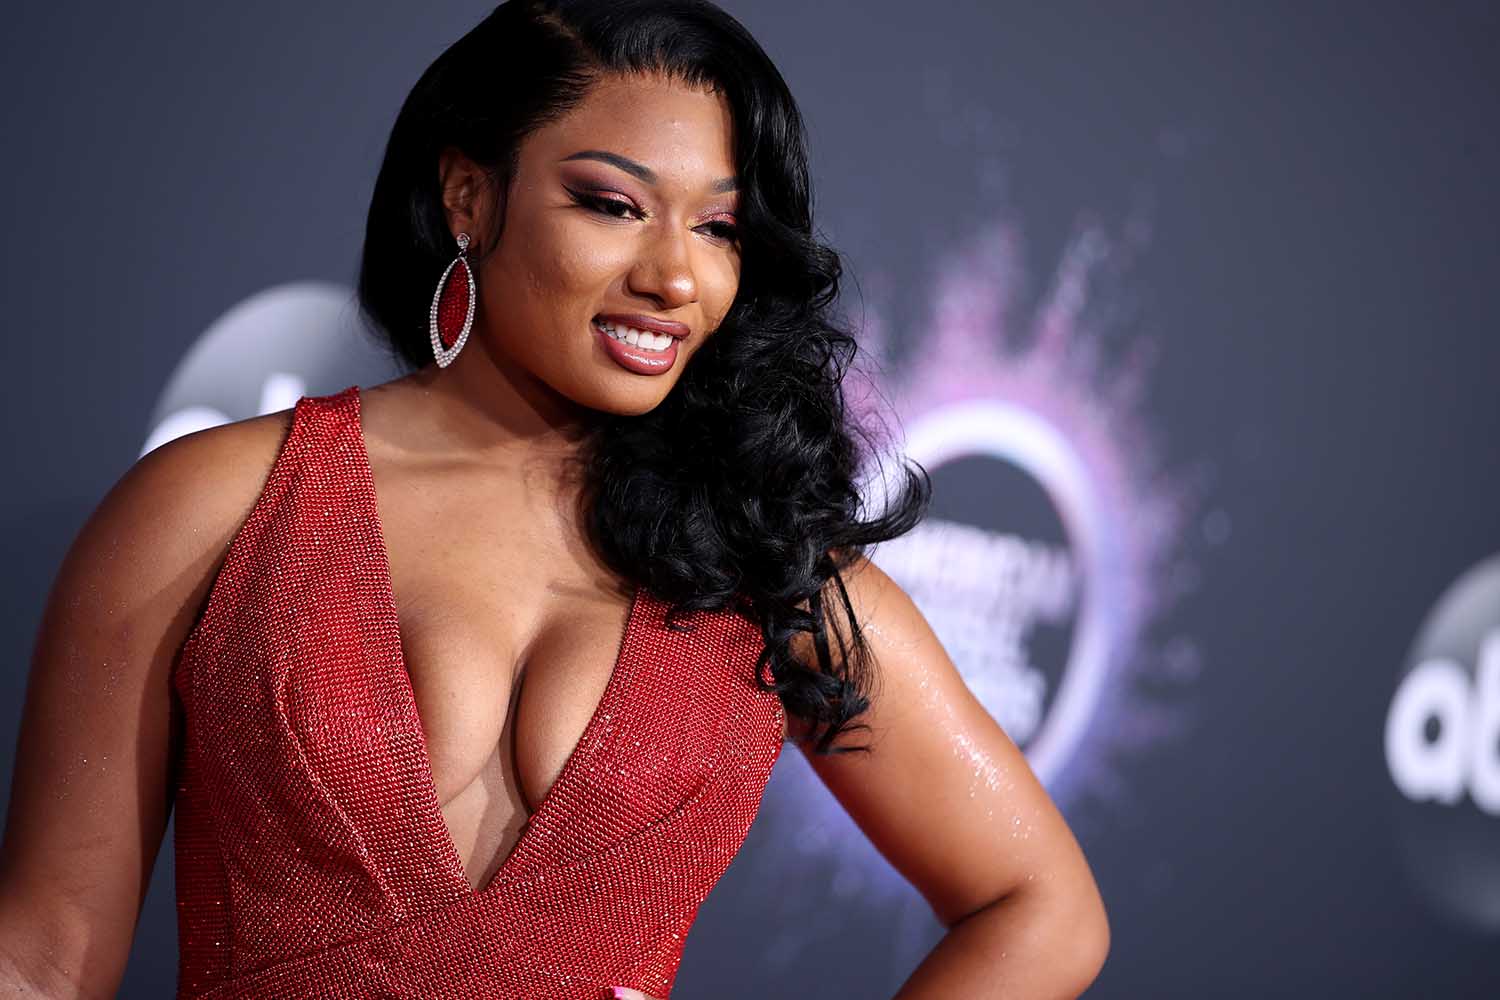 The Internet's Reaction to Megan Thee Stallion's Shooting Is a Problem